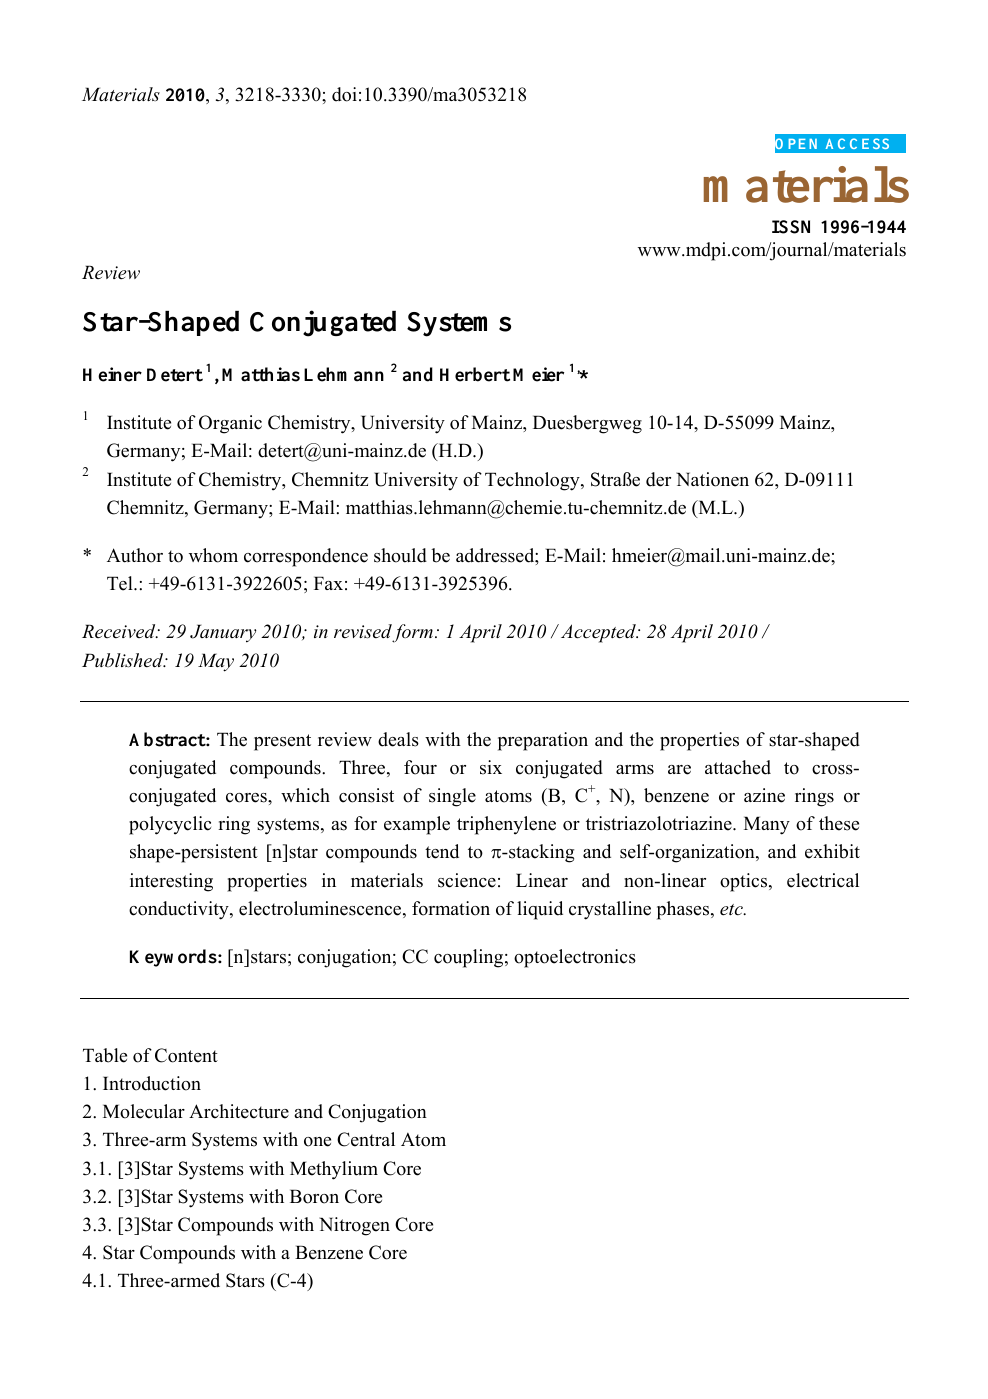 Star Shaped Conjugated Systems Topic Of Research Paper In Chemical Sciences Download Scholarly Article Pdf And Read For Free On Cyberleninka Open Science Hub